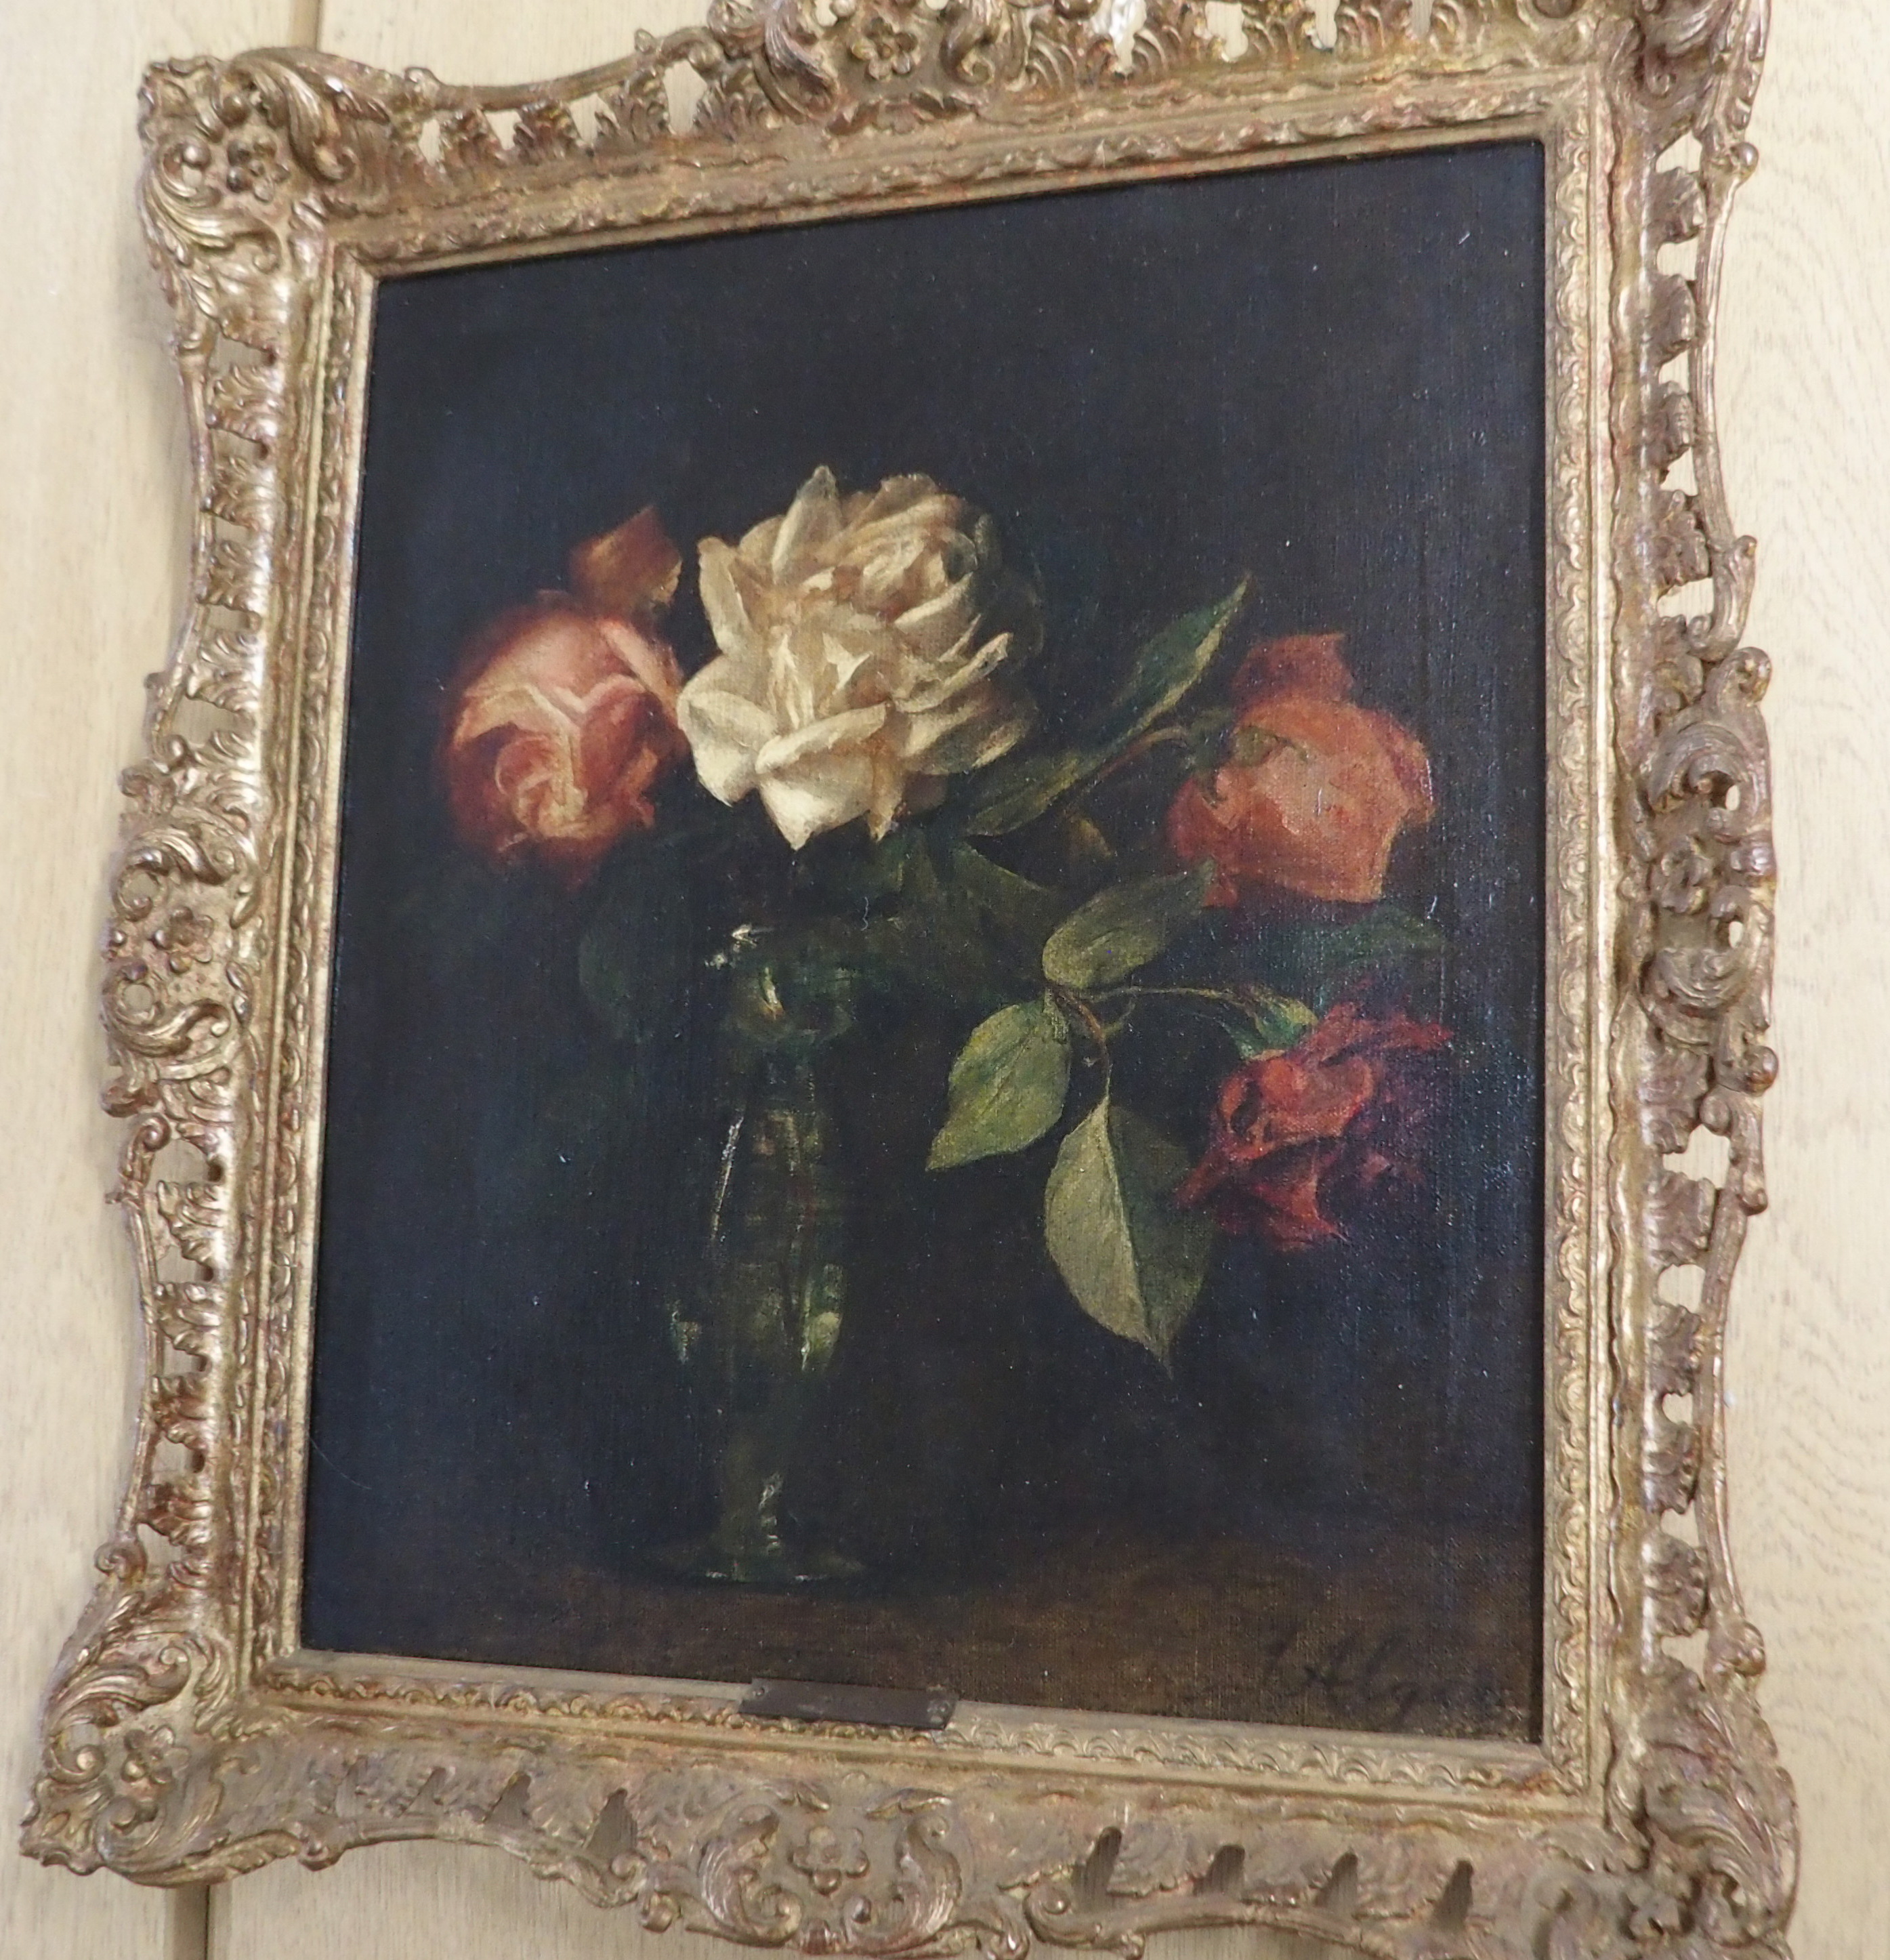 JESSIE ALGIE (SCOTTISH 1859-1927) ROSES IN A GLASS VASE Oil on canvas, signed, 35.5 x 30.5cm (14 x - Image 5 of 7